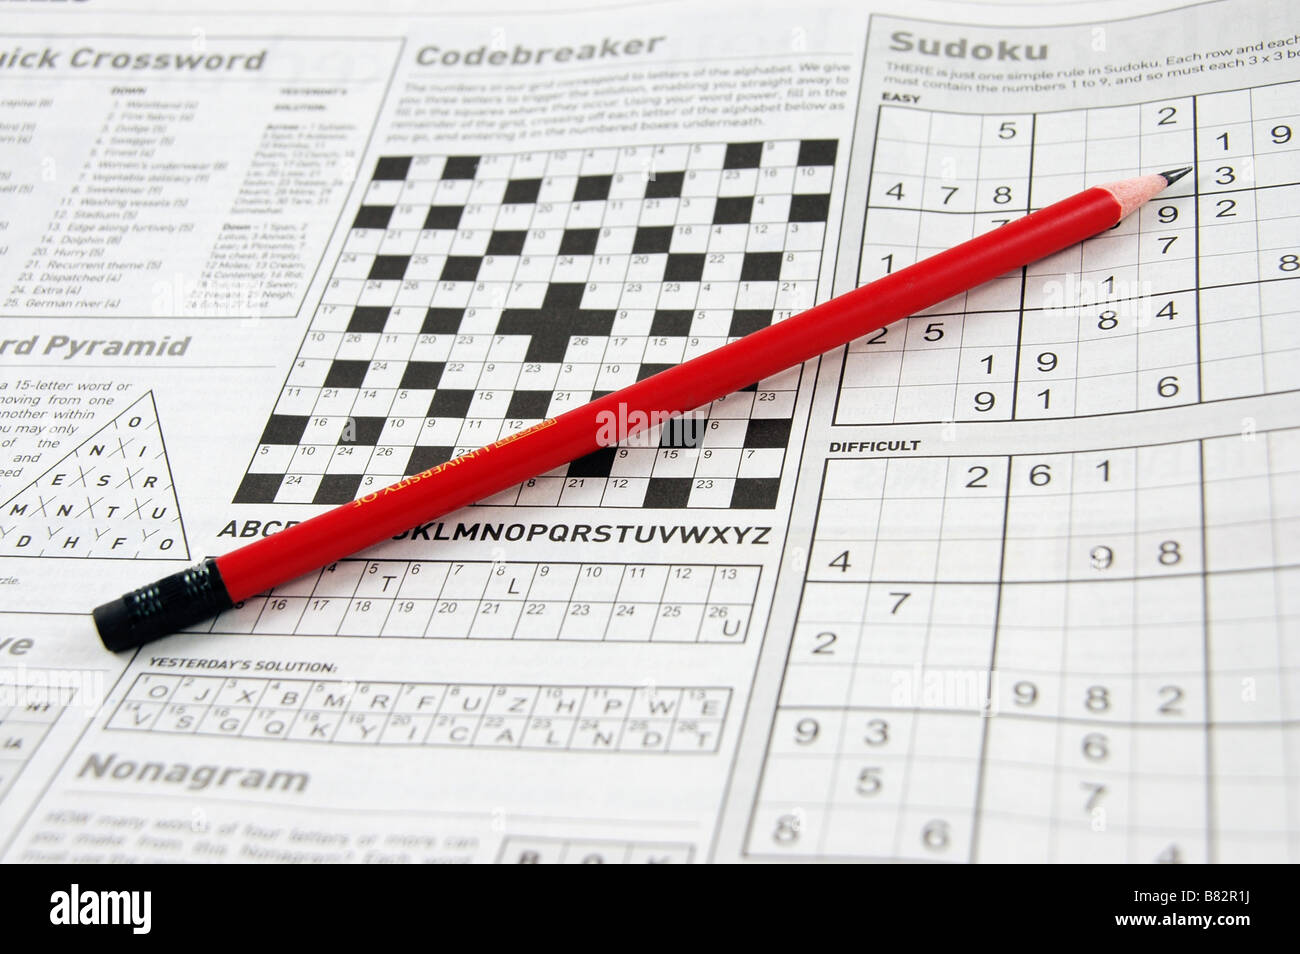 A newspaper page with a variety of word and number puzzles. Stock Photo